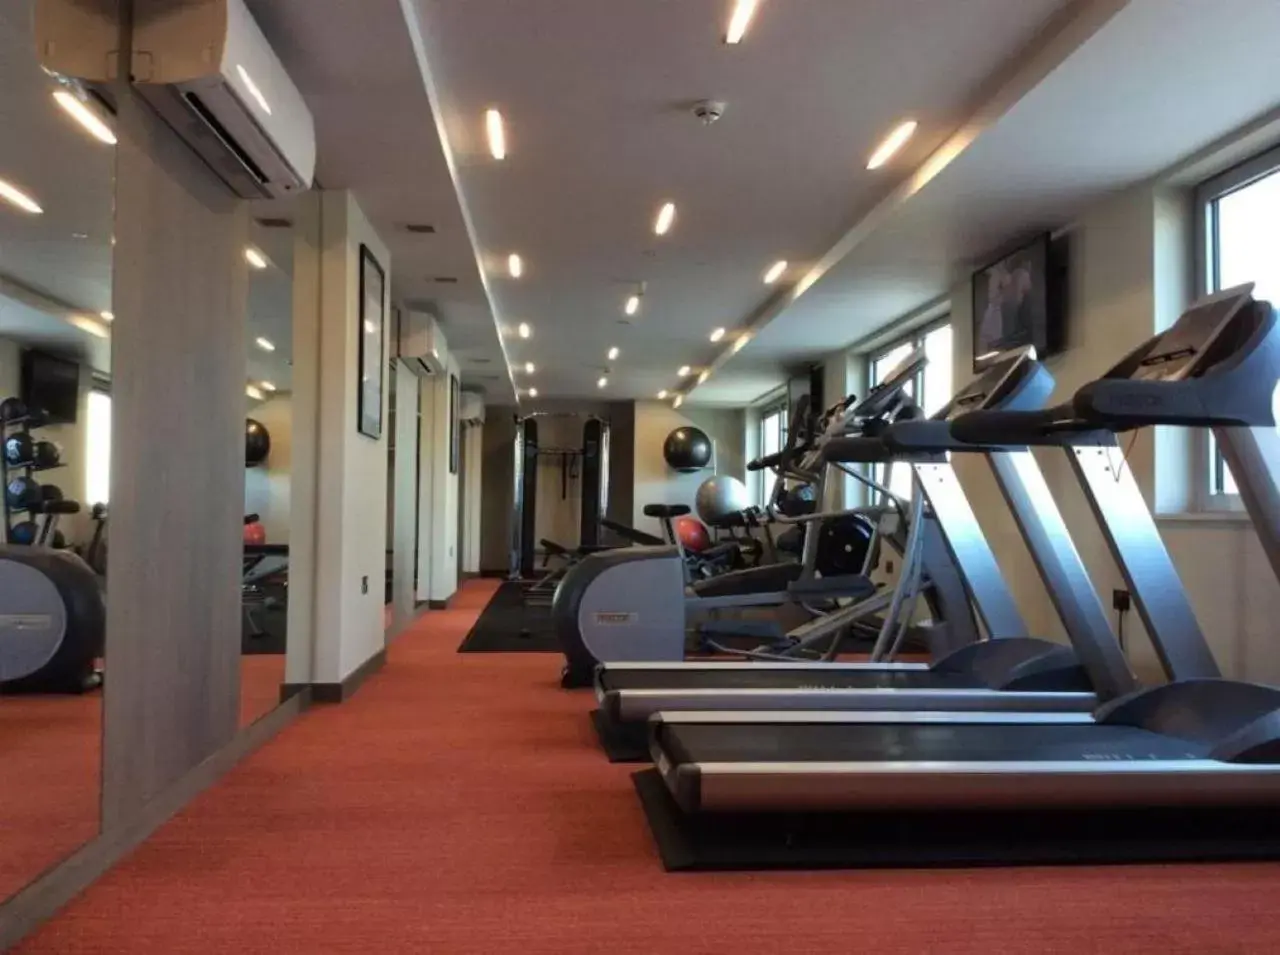 Fitness centre/facilities, Fitness Center/Facilities in Clayton Hotel Chiswick